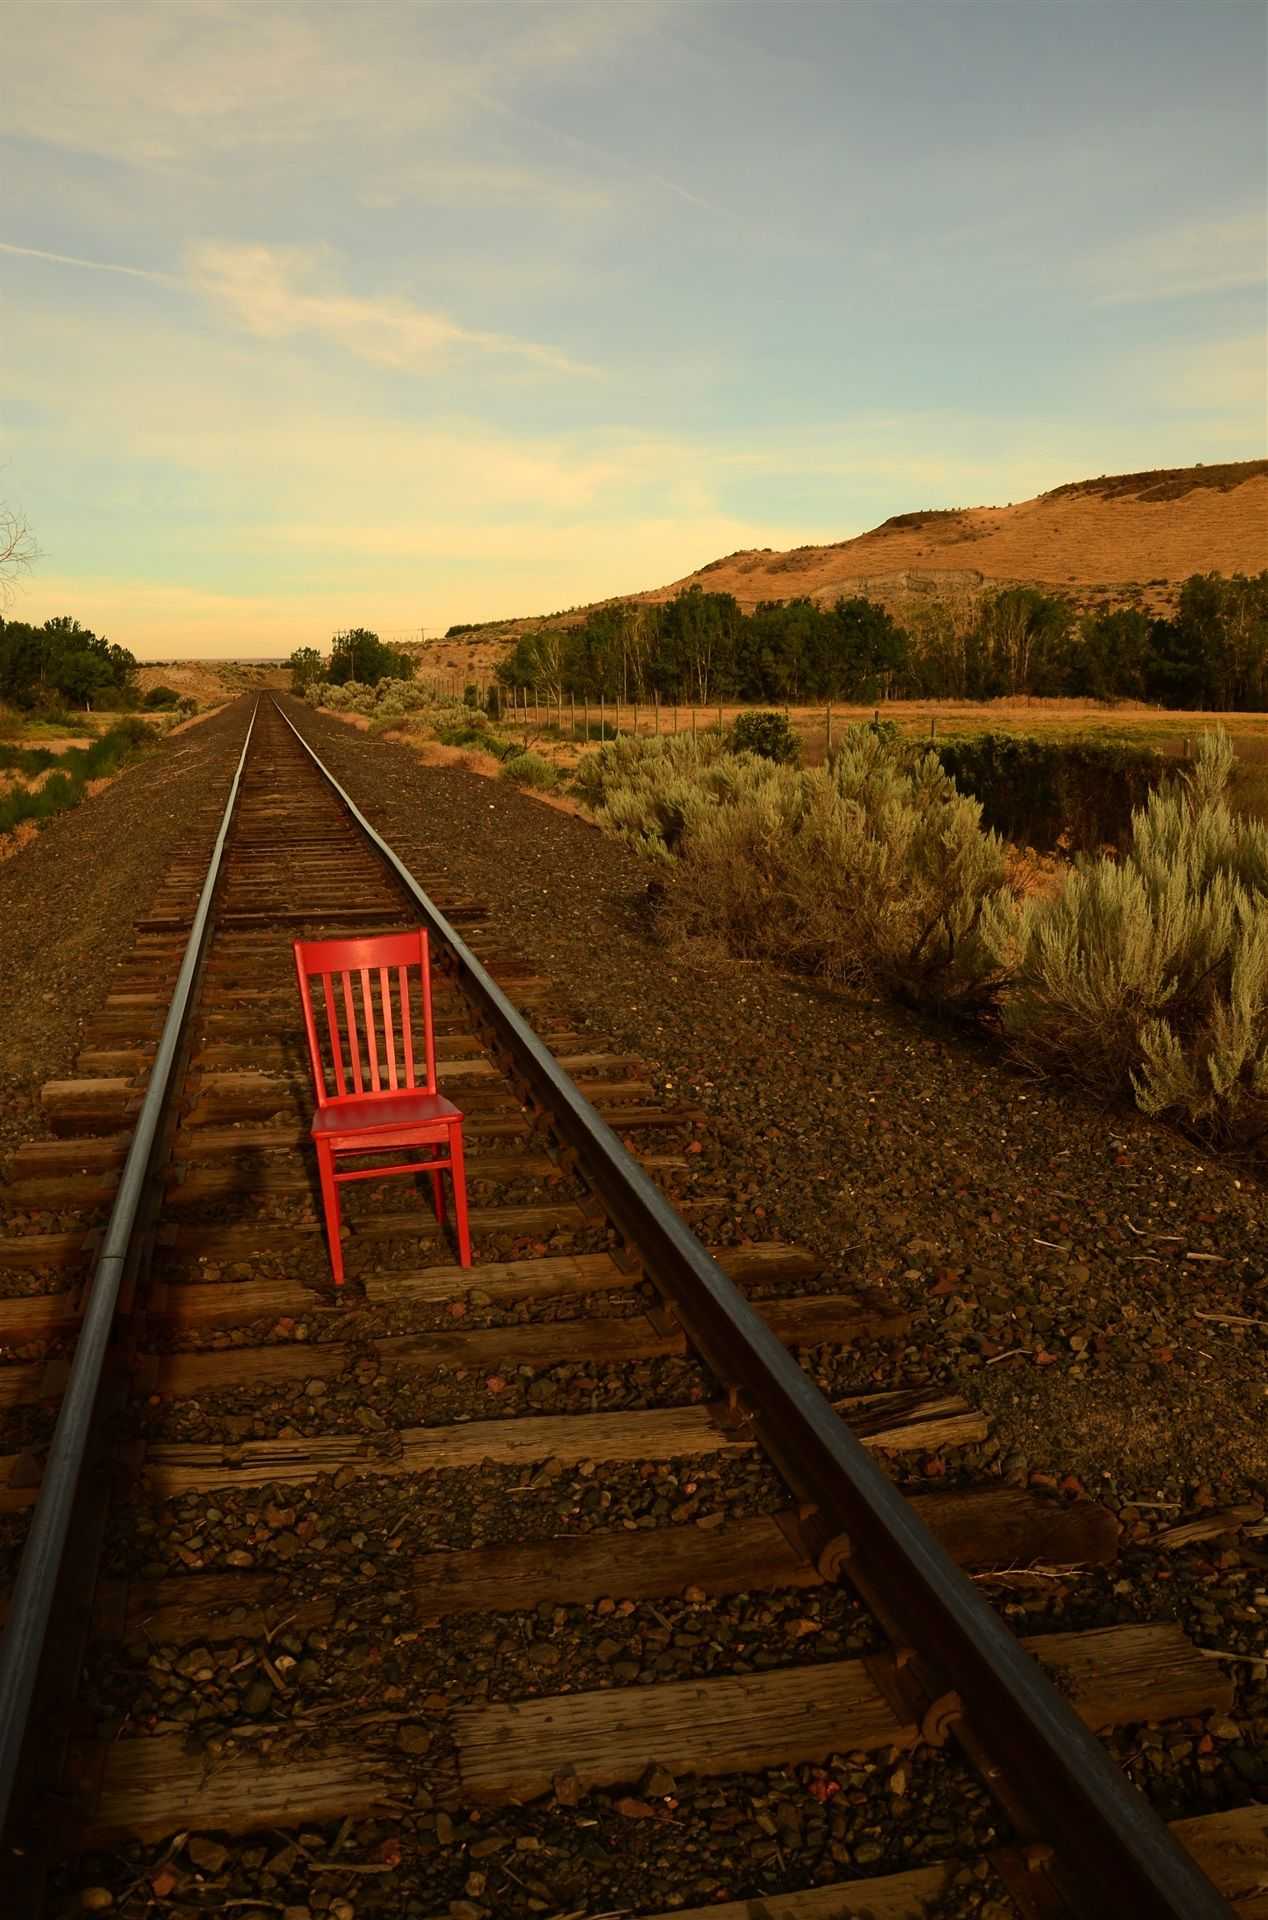 Red chair put on a railroad tie in the middle of the tracks as they go off into the distance